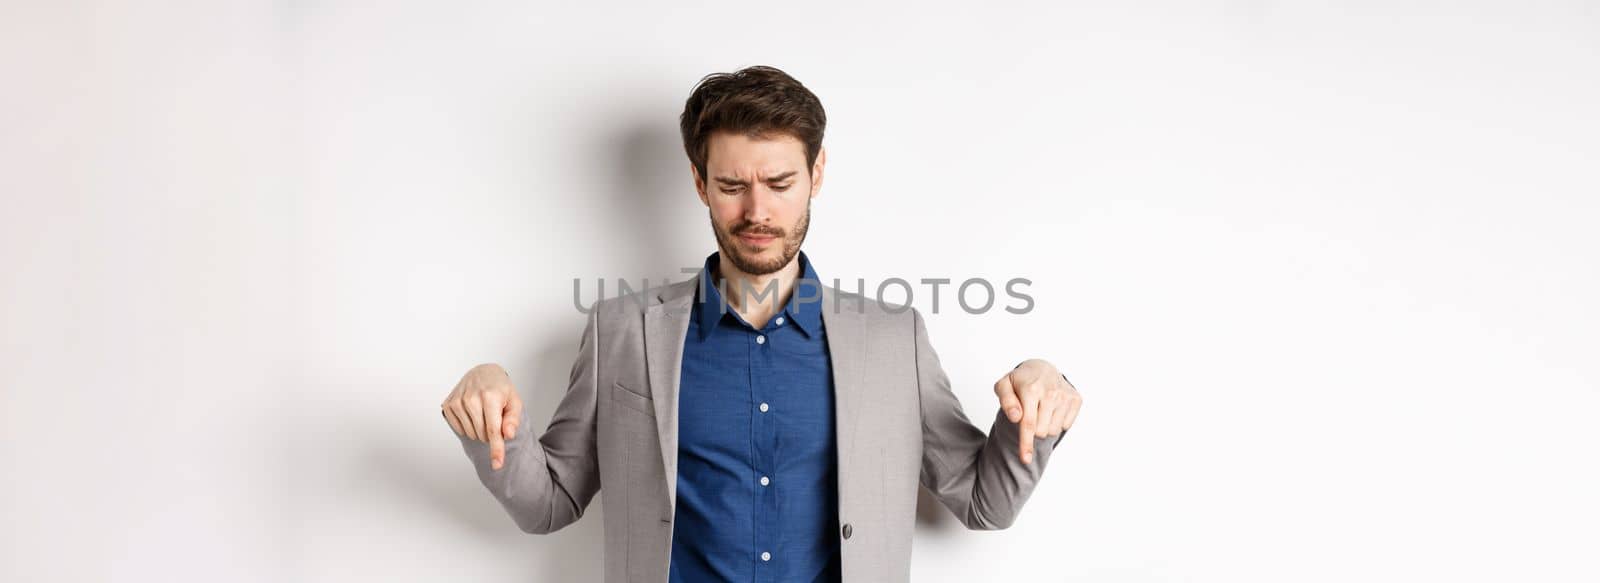 Unimpressed young businessman frowning disappointed, pointing and looking down at bad promotion, standing displeased on white background.